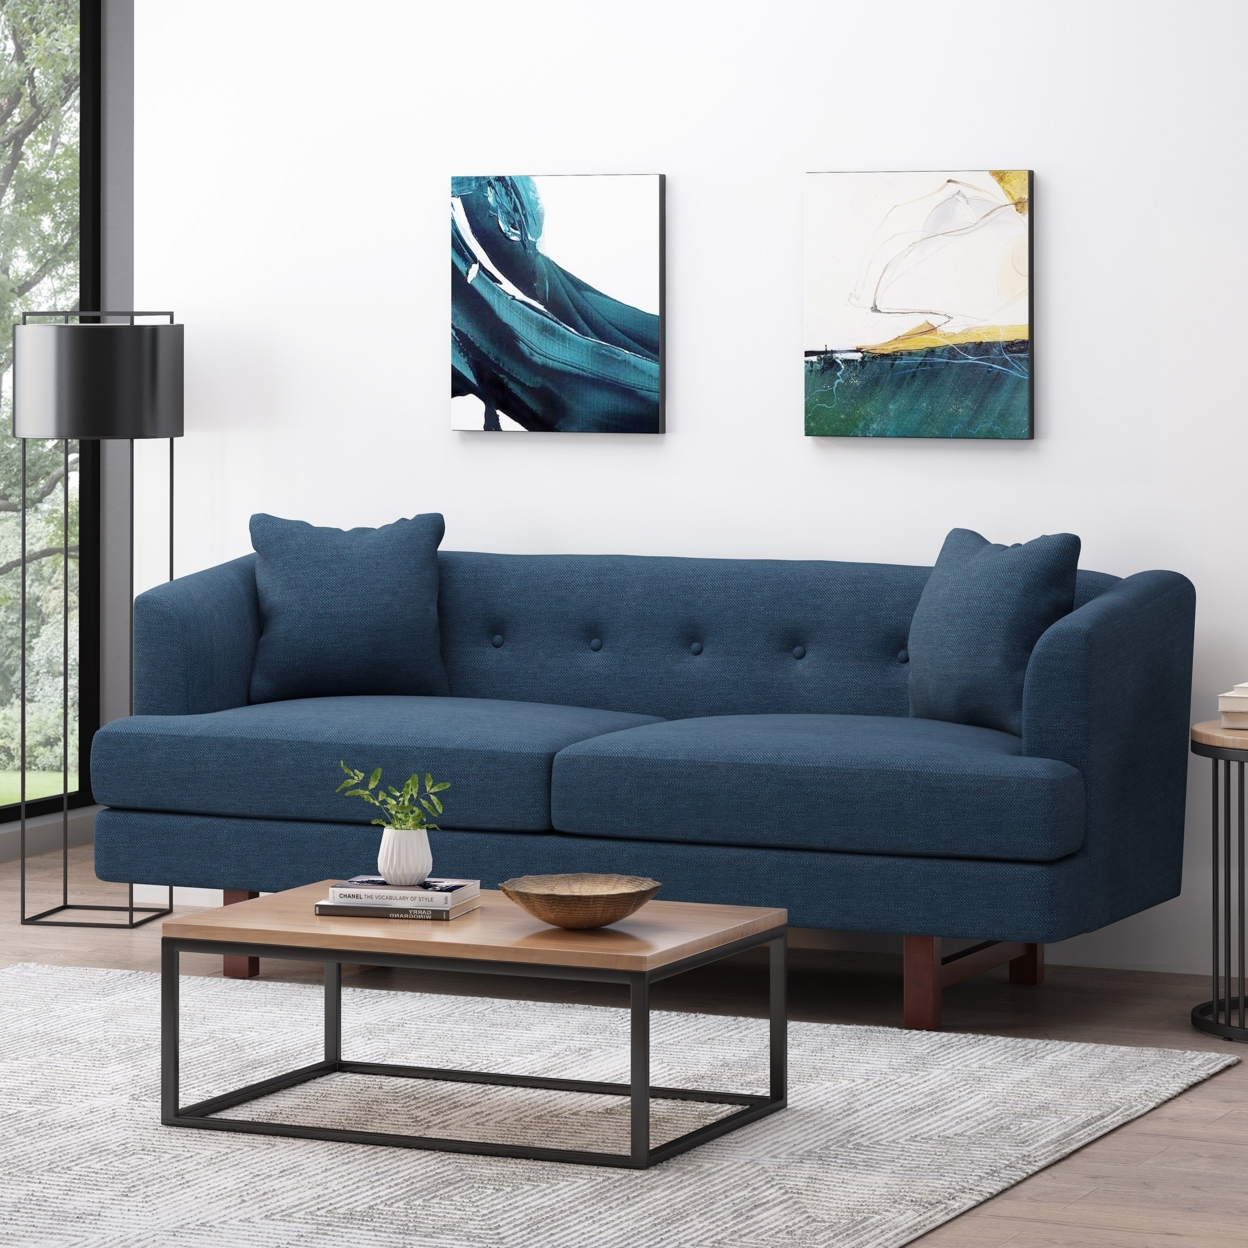 Sparks Mid-Century Modern Upholstered 3 Seater Sofa - Espresso/charcoal